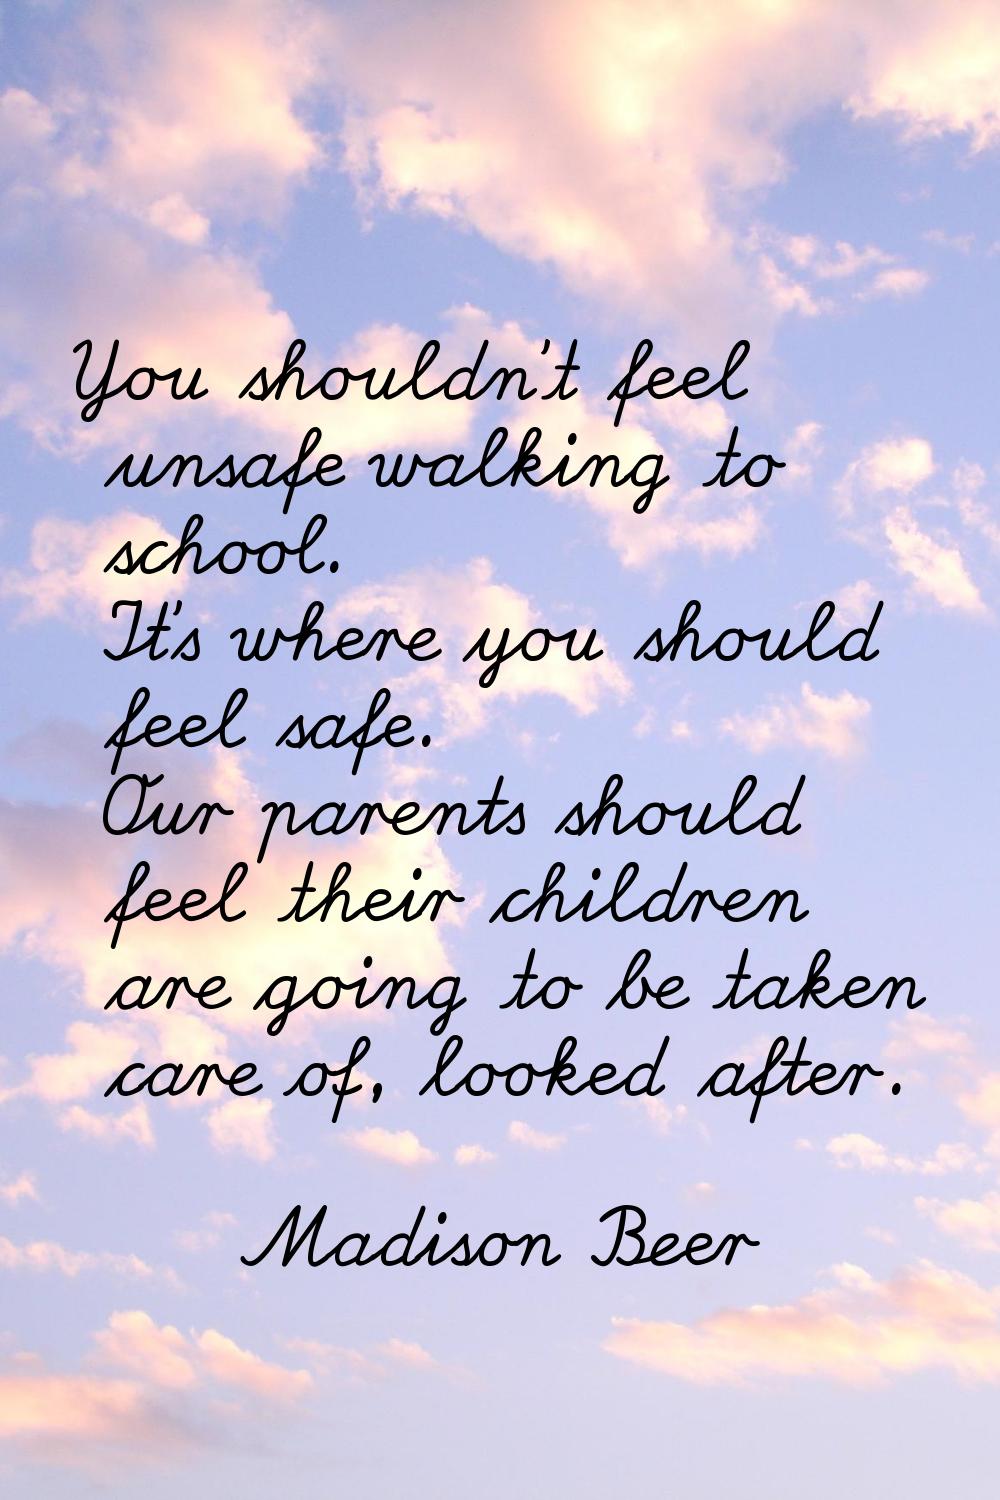 You shouldn't feel unsafe walking to school. It's where you should feel safe. Our parents should fe